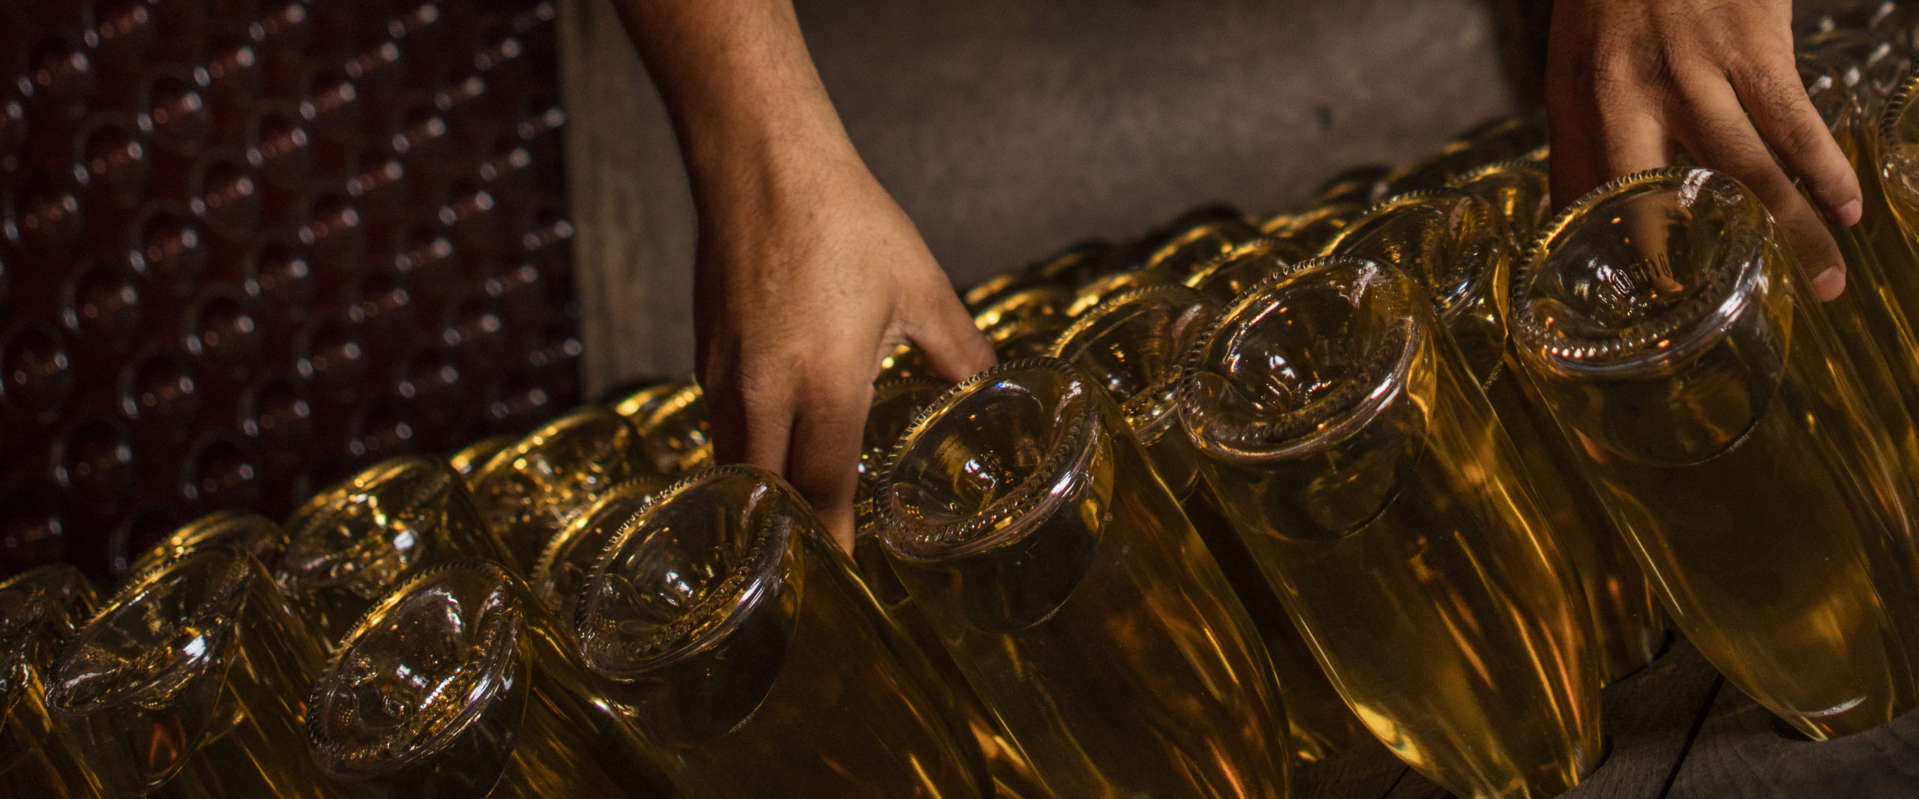 Cellar worker's hands riddling bottles in the wine caves